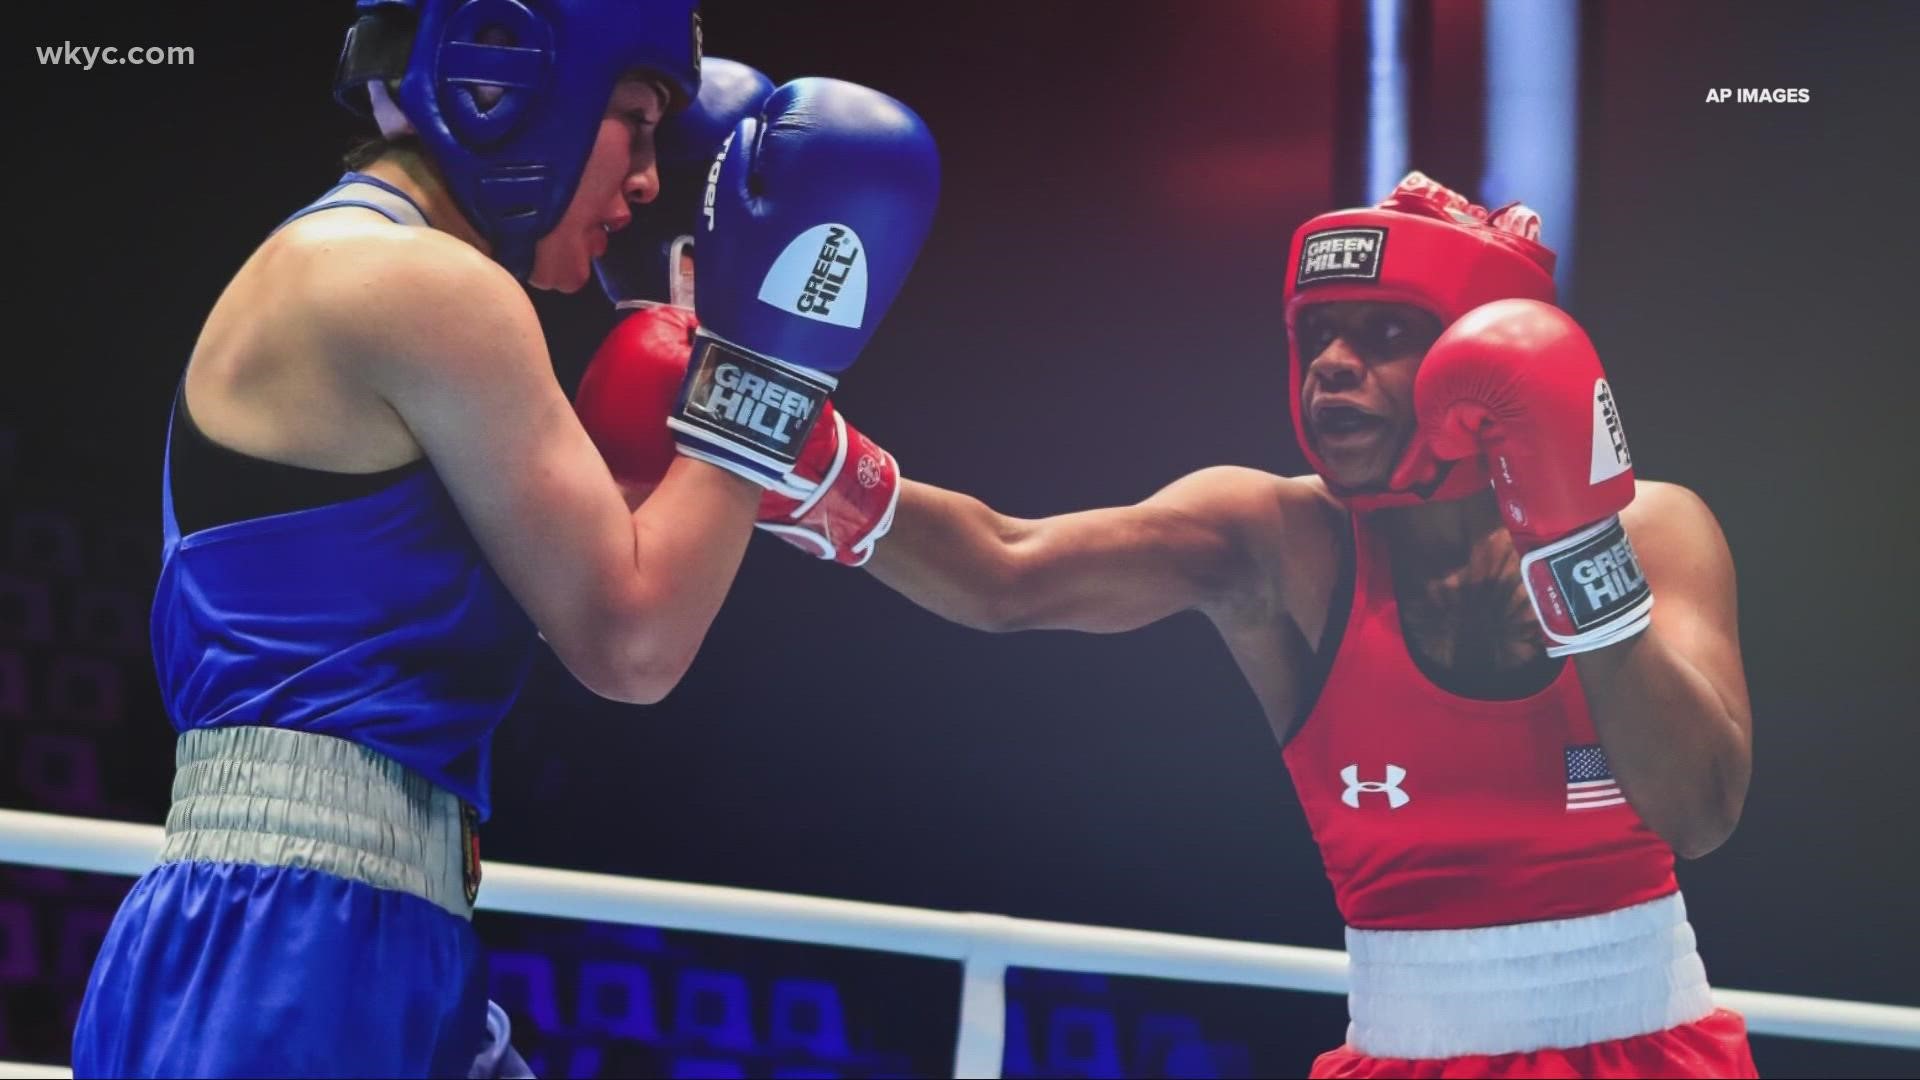 Jones is the first woman from Ohio to medal in Olympic boxing, but tragedy almost kept her from fulfilling her dreams.